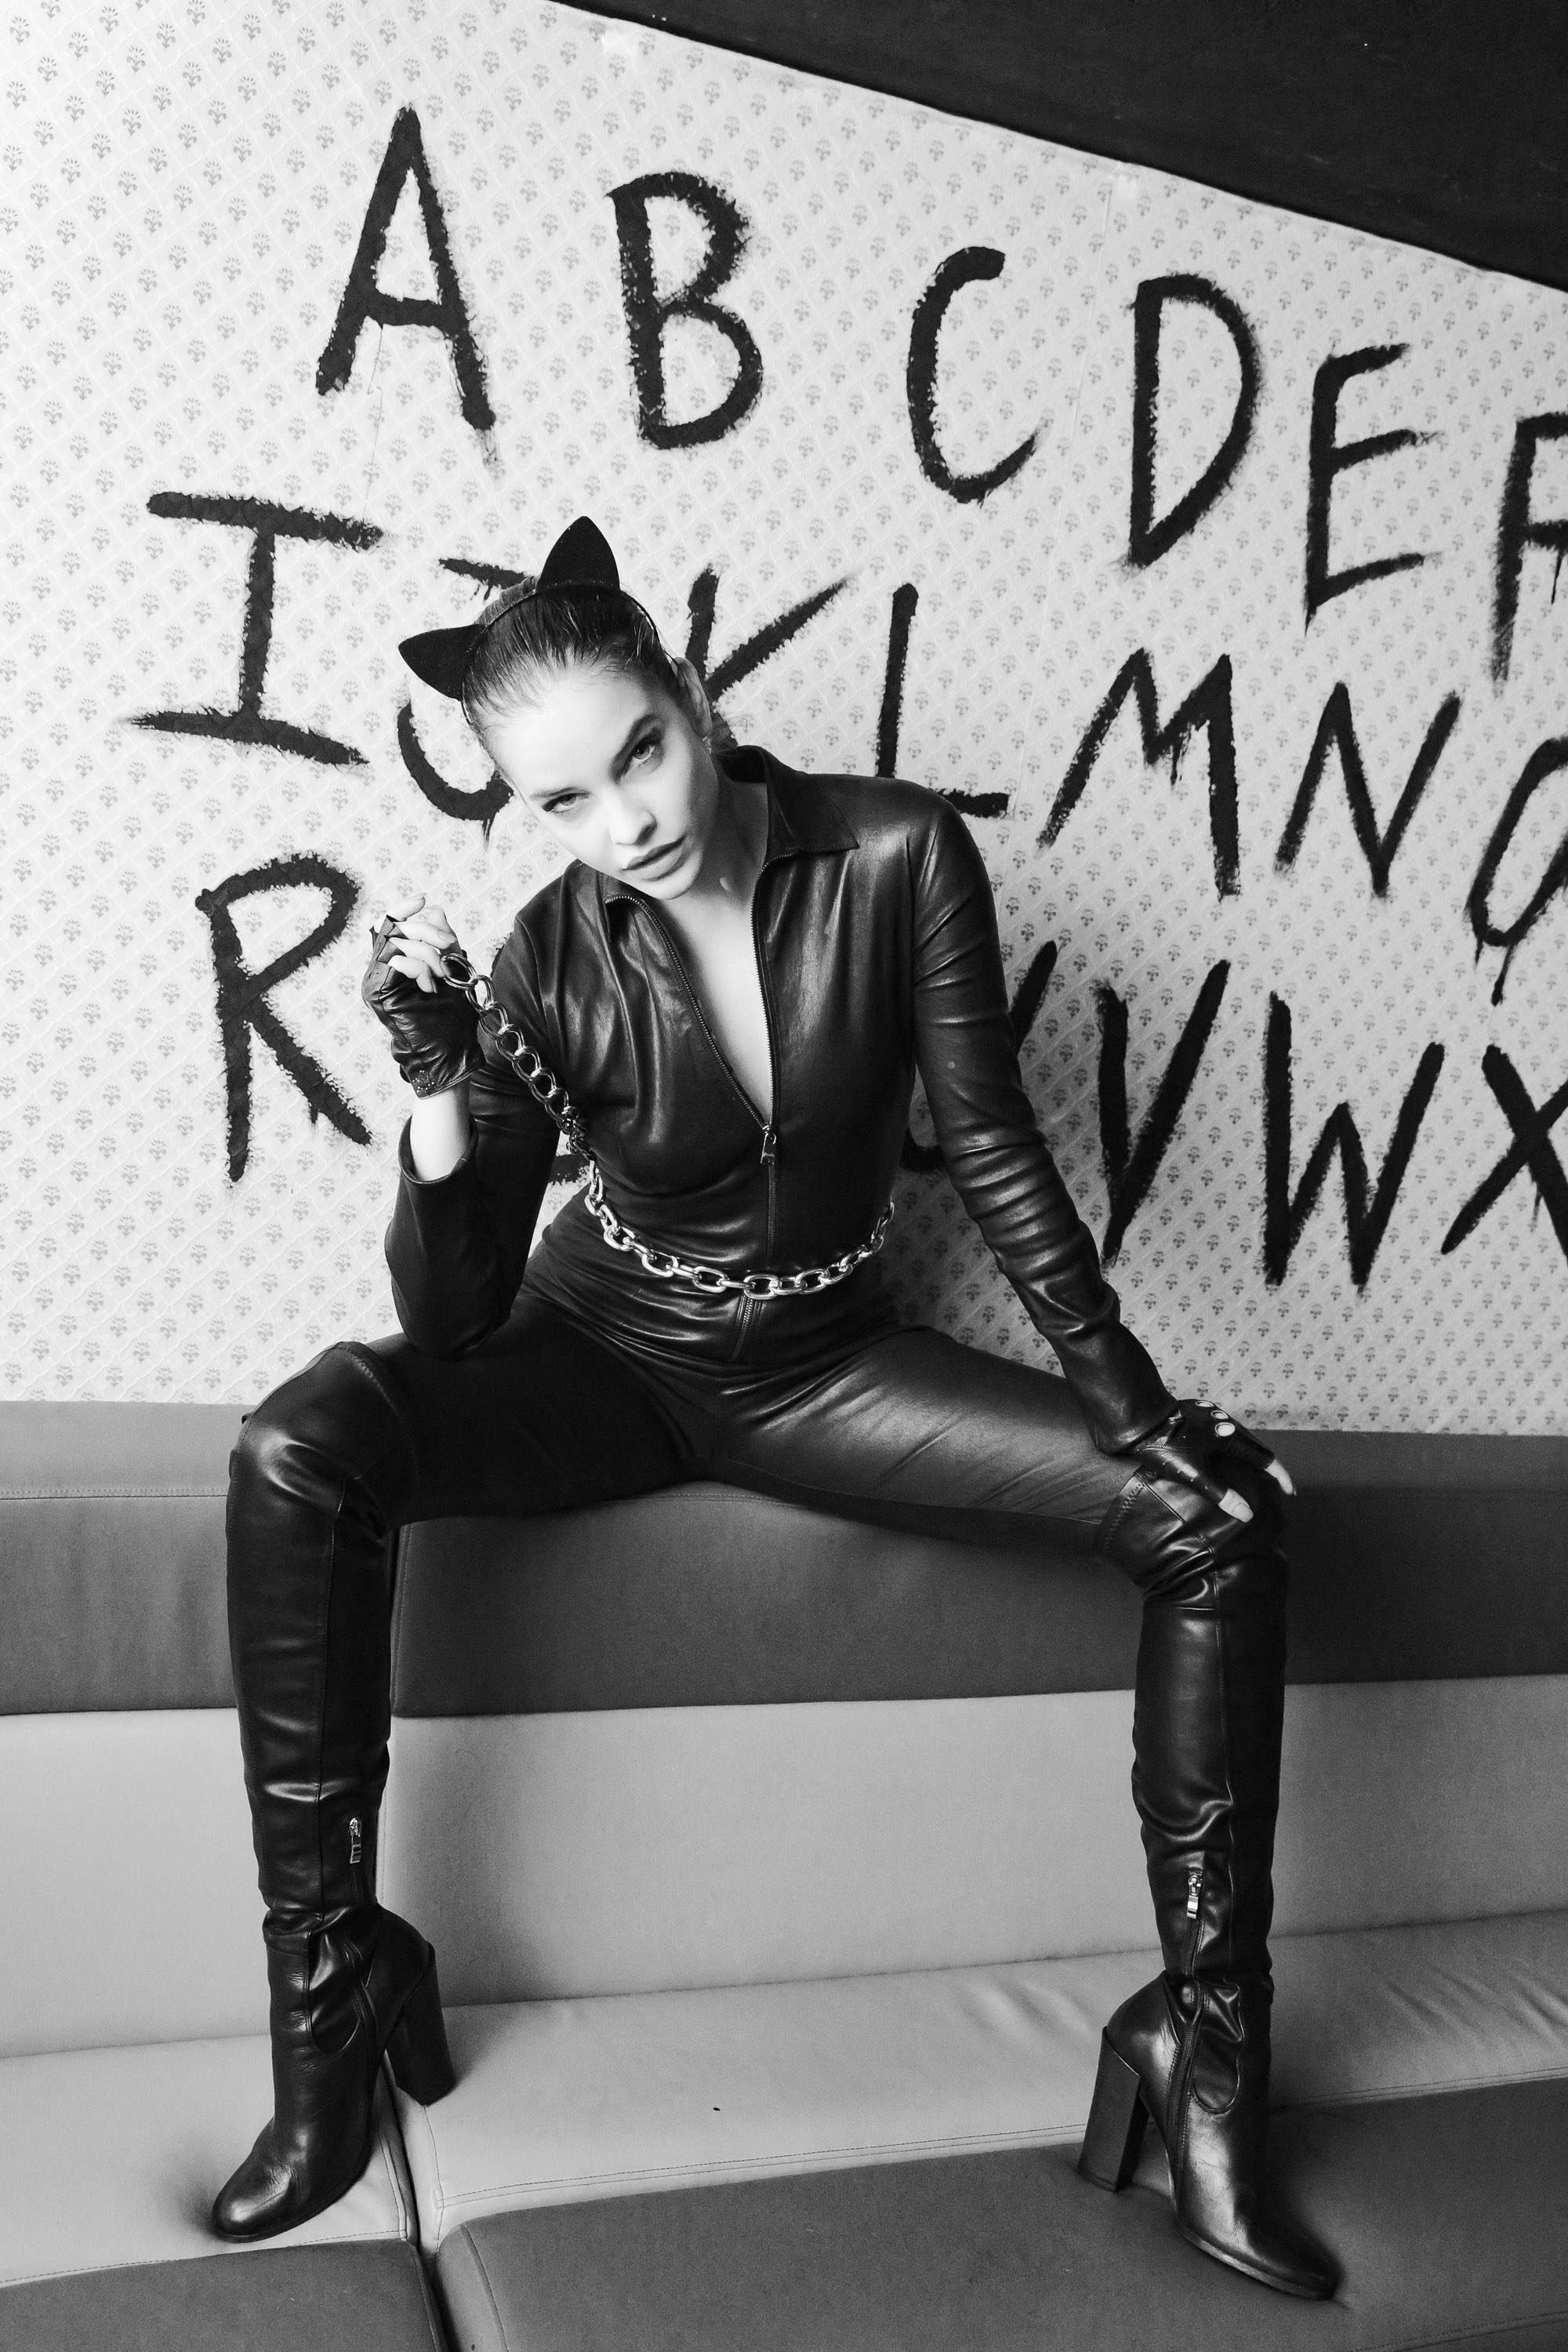 Barbara Palvin dressed as Catwoman at The Upside Down Club